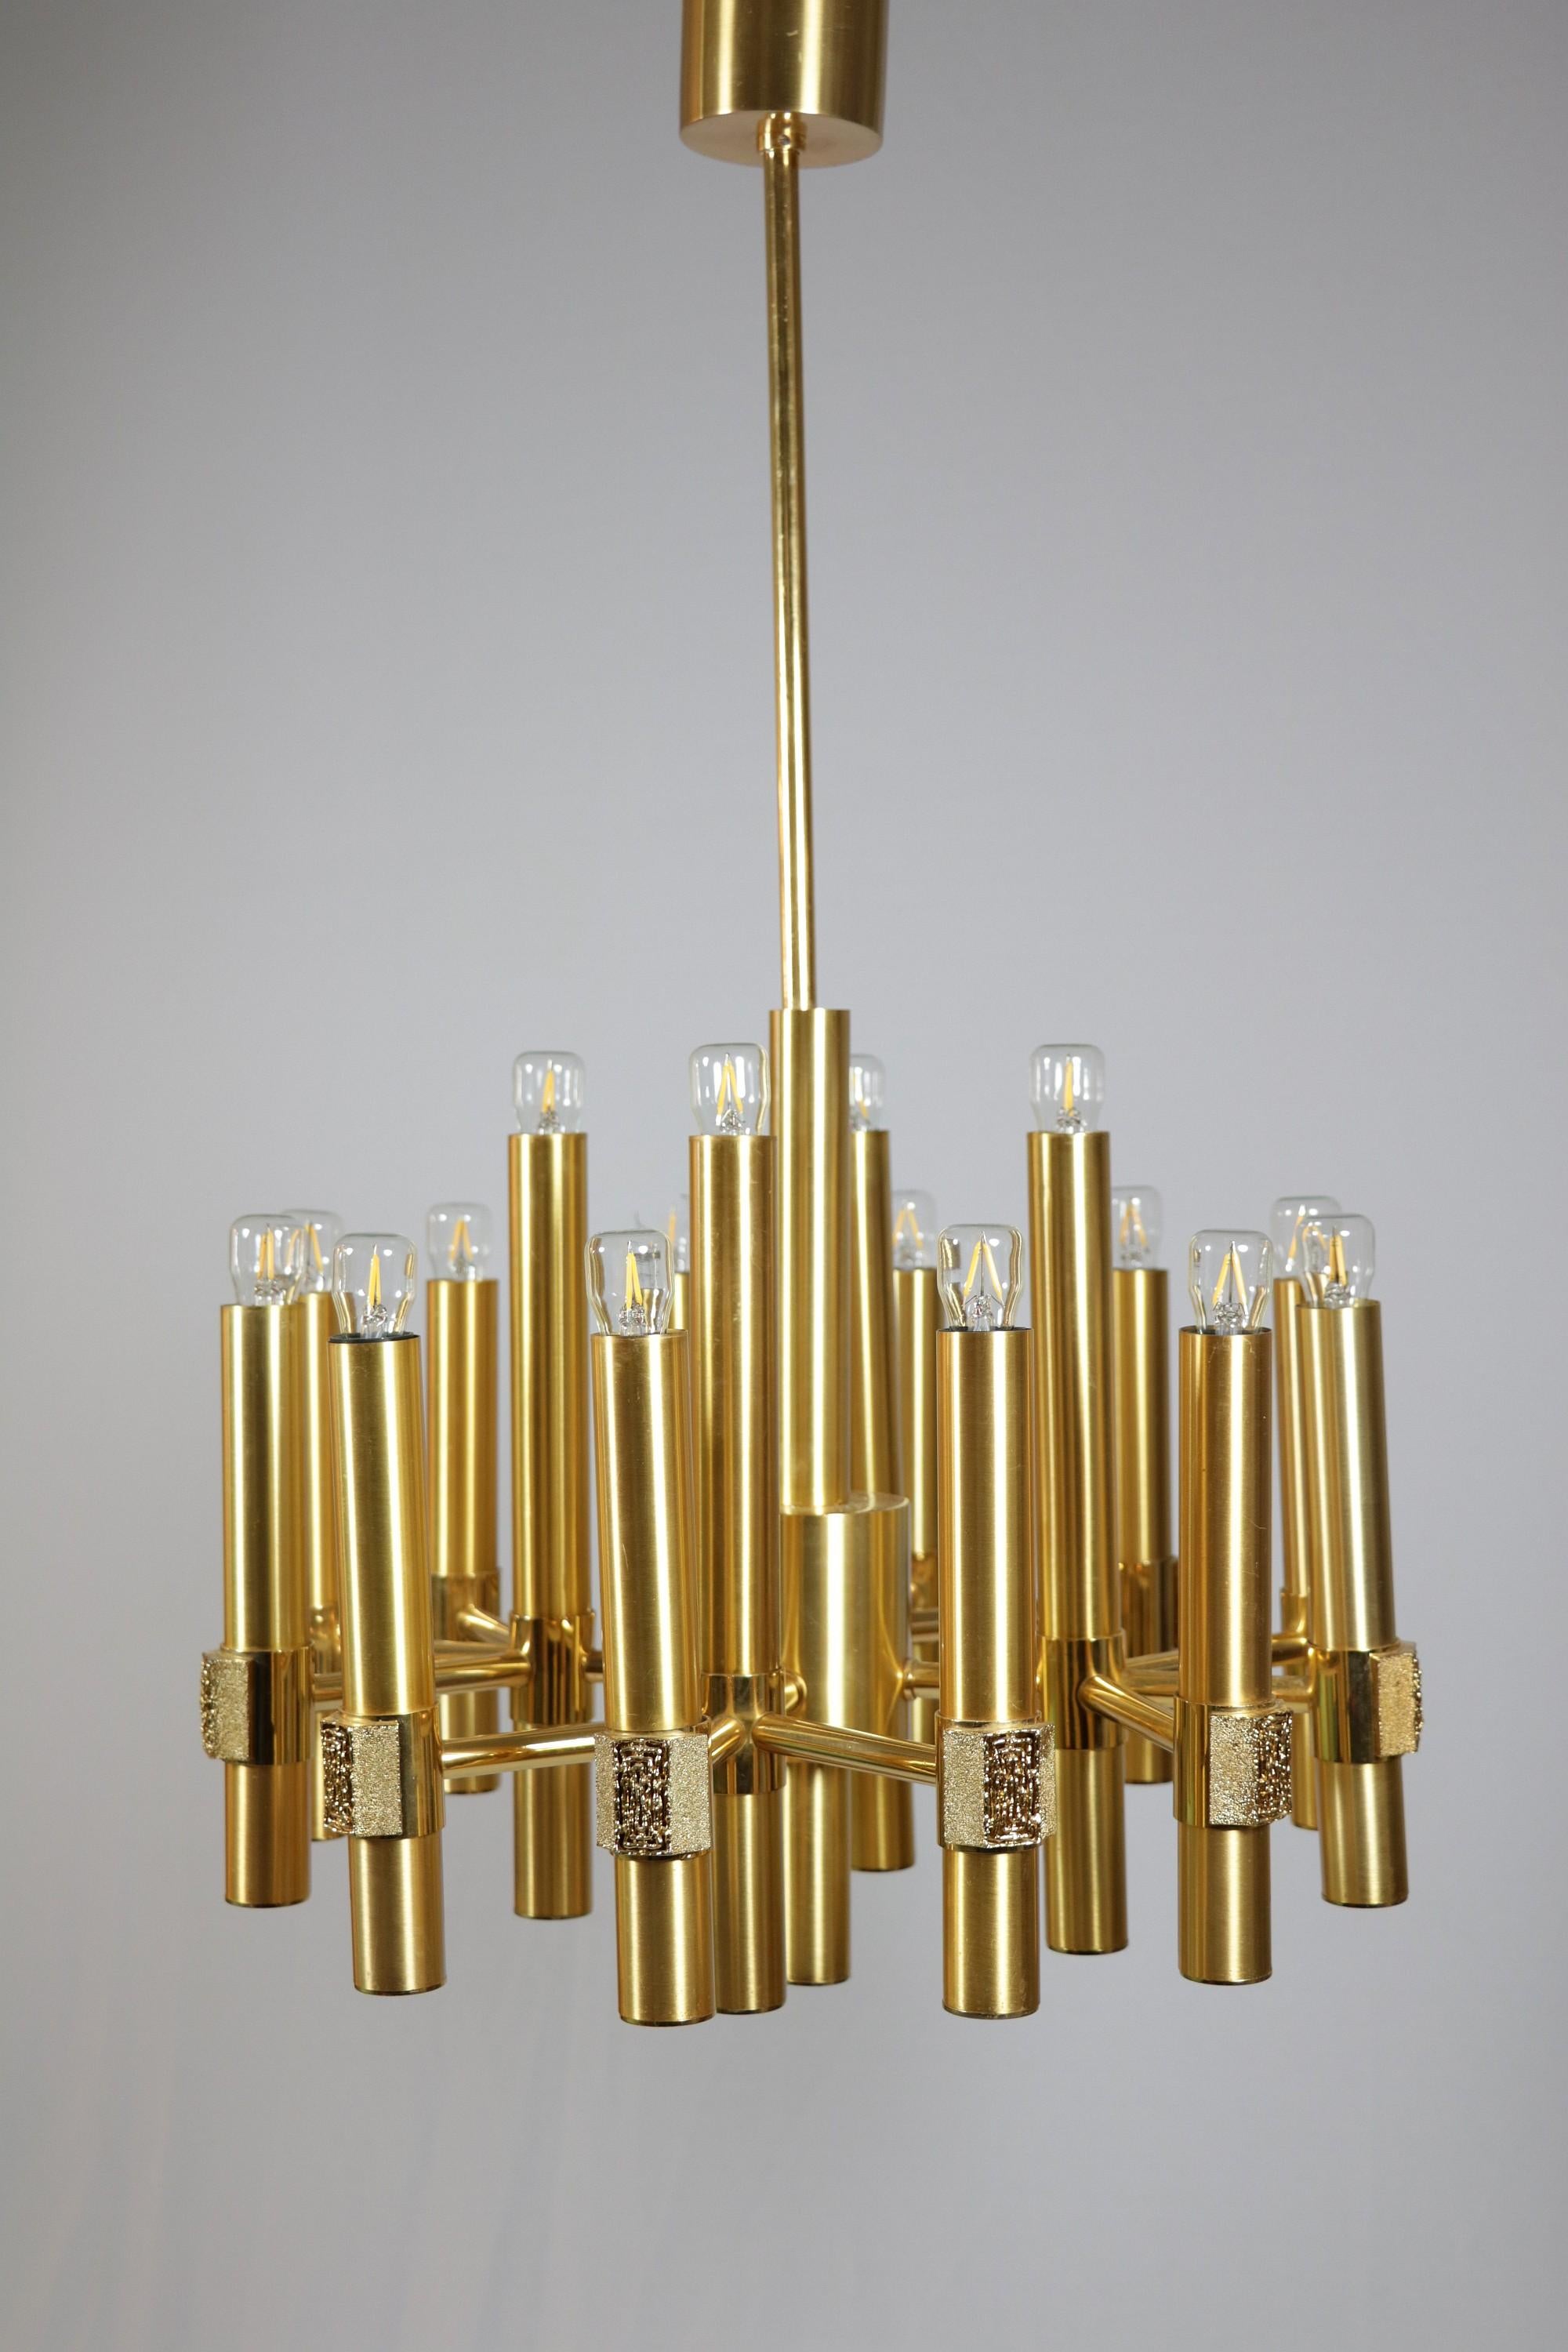 Representative chandelier made of brass.
By ESPERIA, Italy.
Designer: Angelo Brotto.
 
Very high quality workmanship, with brutalistic elements on the socket sleeves.
Makes a luxurious impression, and yet is restrained.
 
Measures: Diameter: